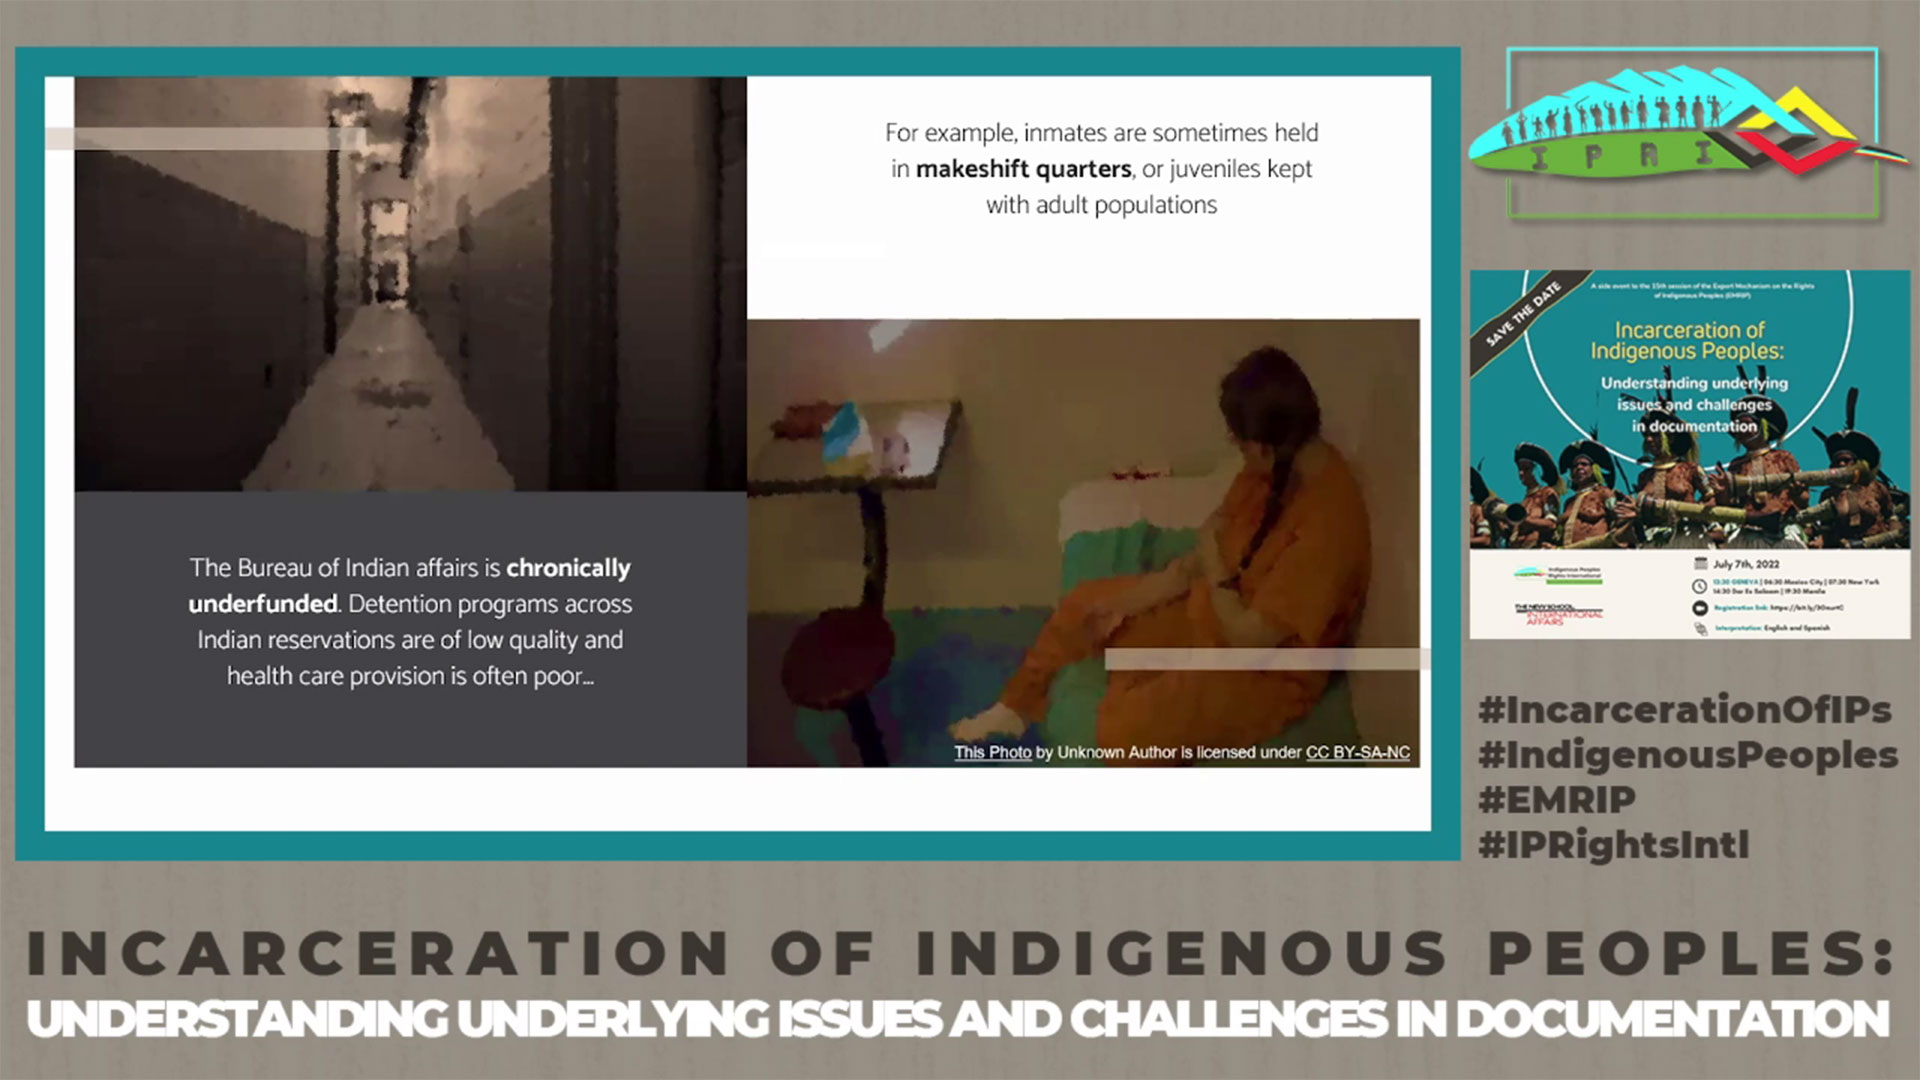 Incarceration of indigenous peoples: documentation and challenges